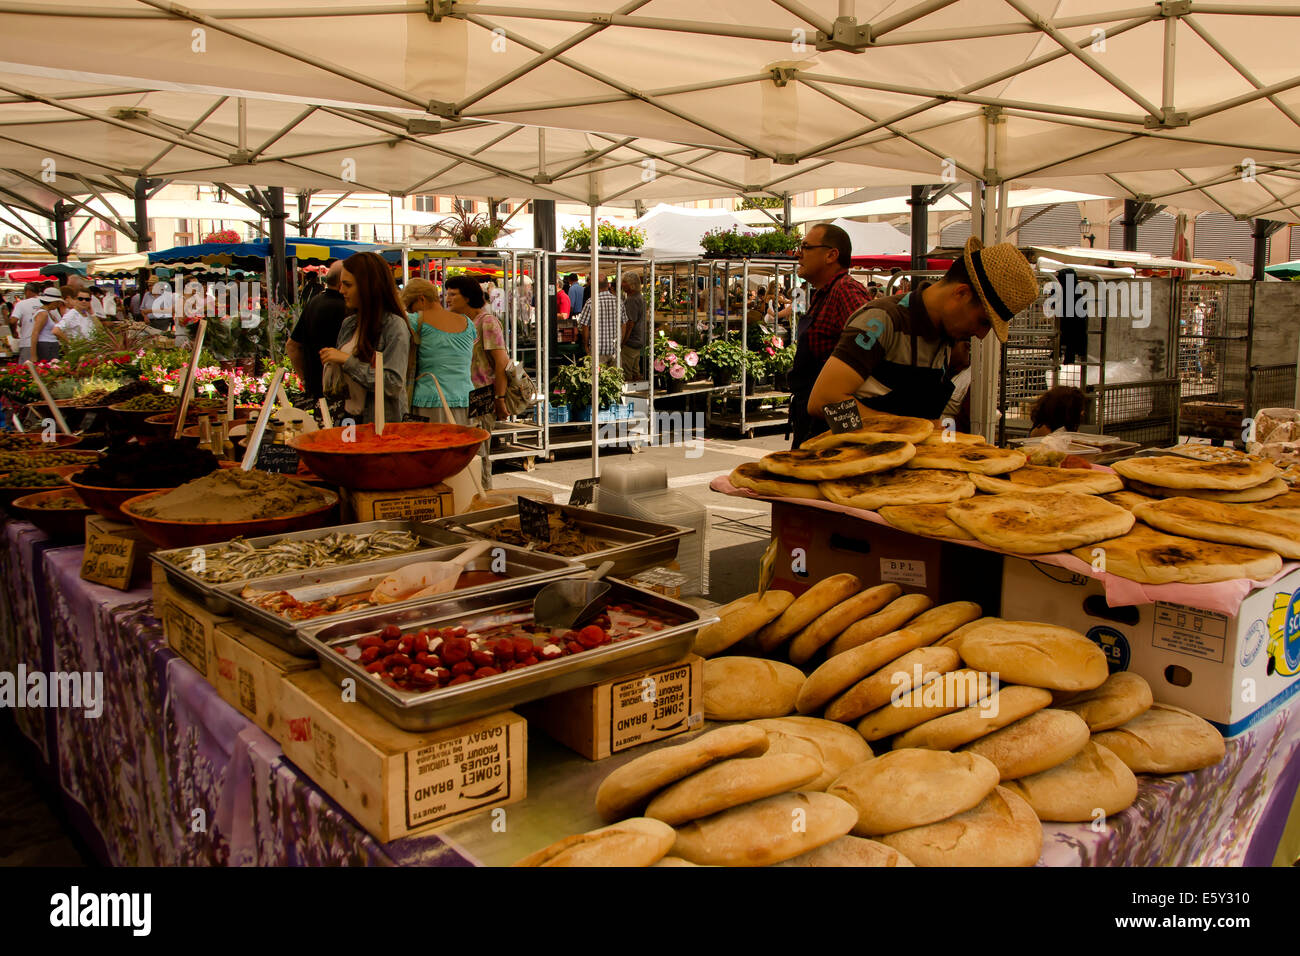 Arab bread and multiple delicacies in stall in Moissac Sunday market, south west France, illustrating North African influence. Stock Photo